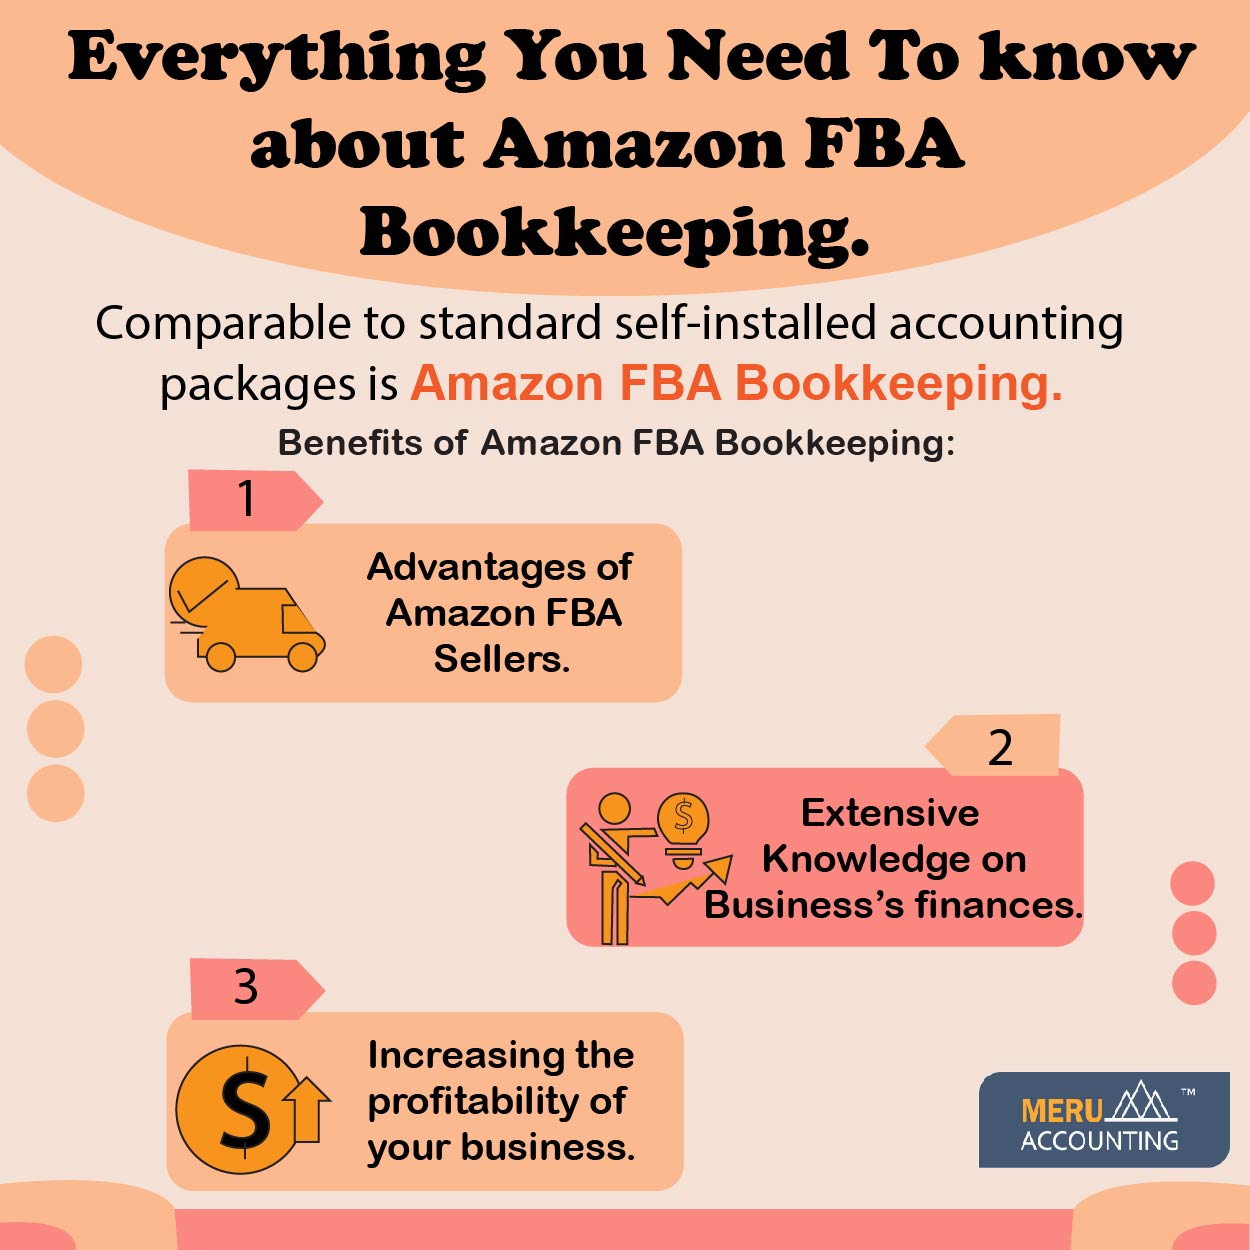 Everything You Need To know about Amazon FBA Bookkeeping1250 by 1250 01